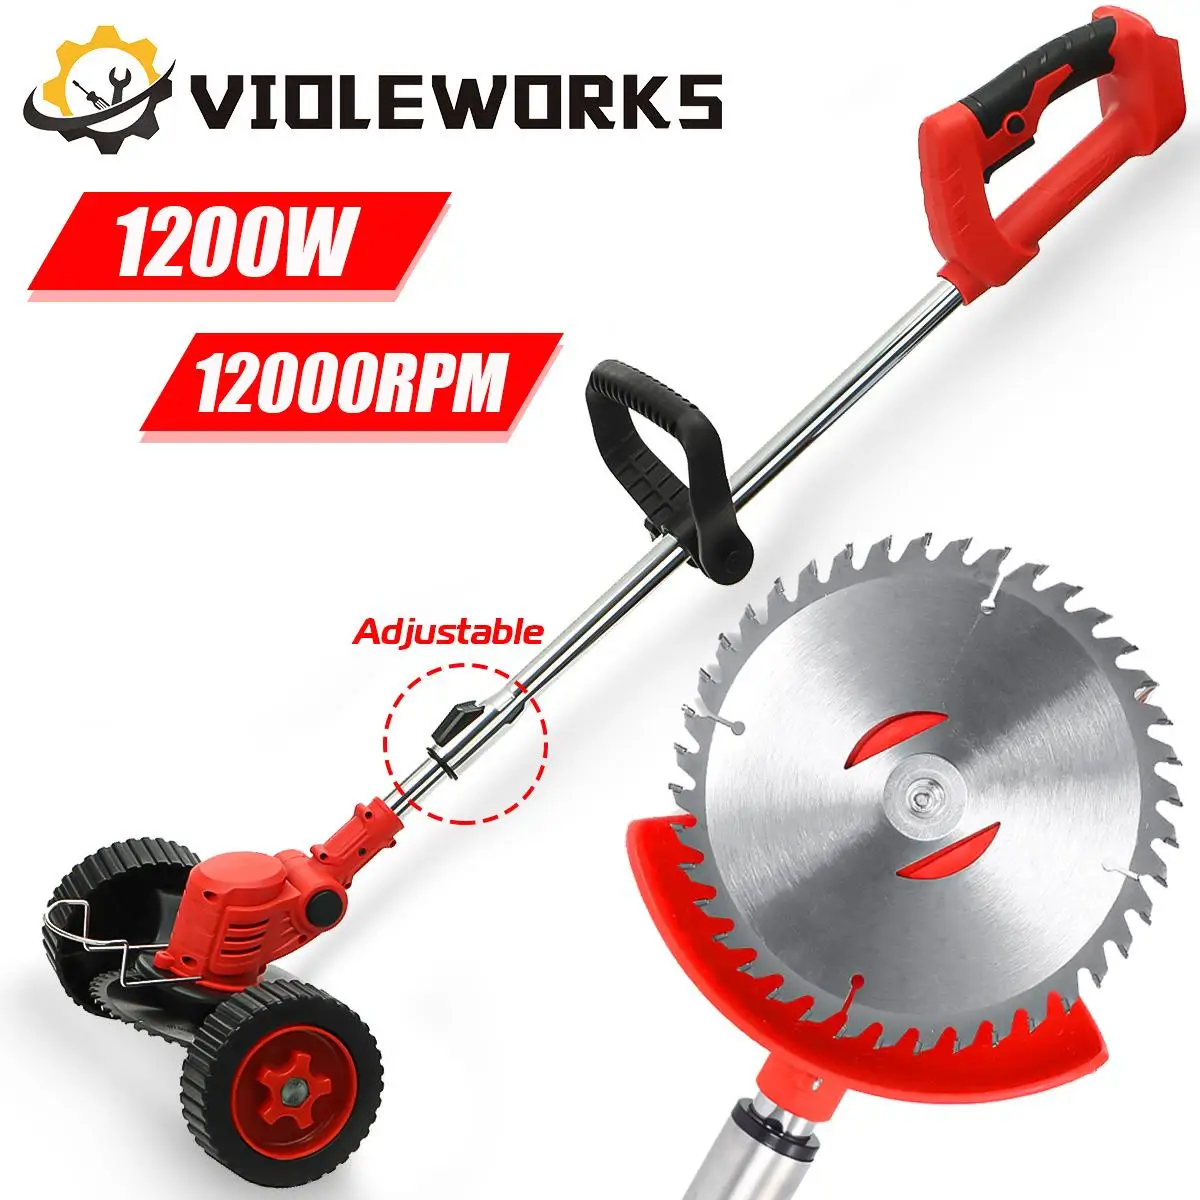 1200W Electric Grass Trimmer Cordless Lawn Mower Hedge Trimmer Adjustable Handheld Garden Power Pruning for 18V Battery